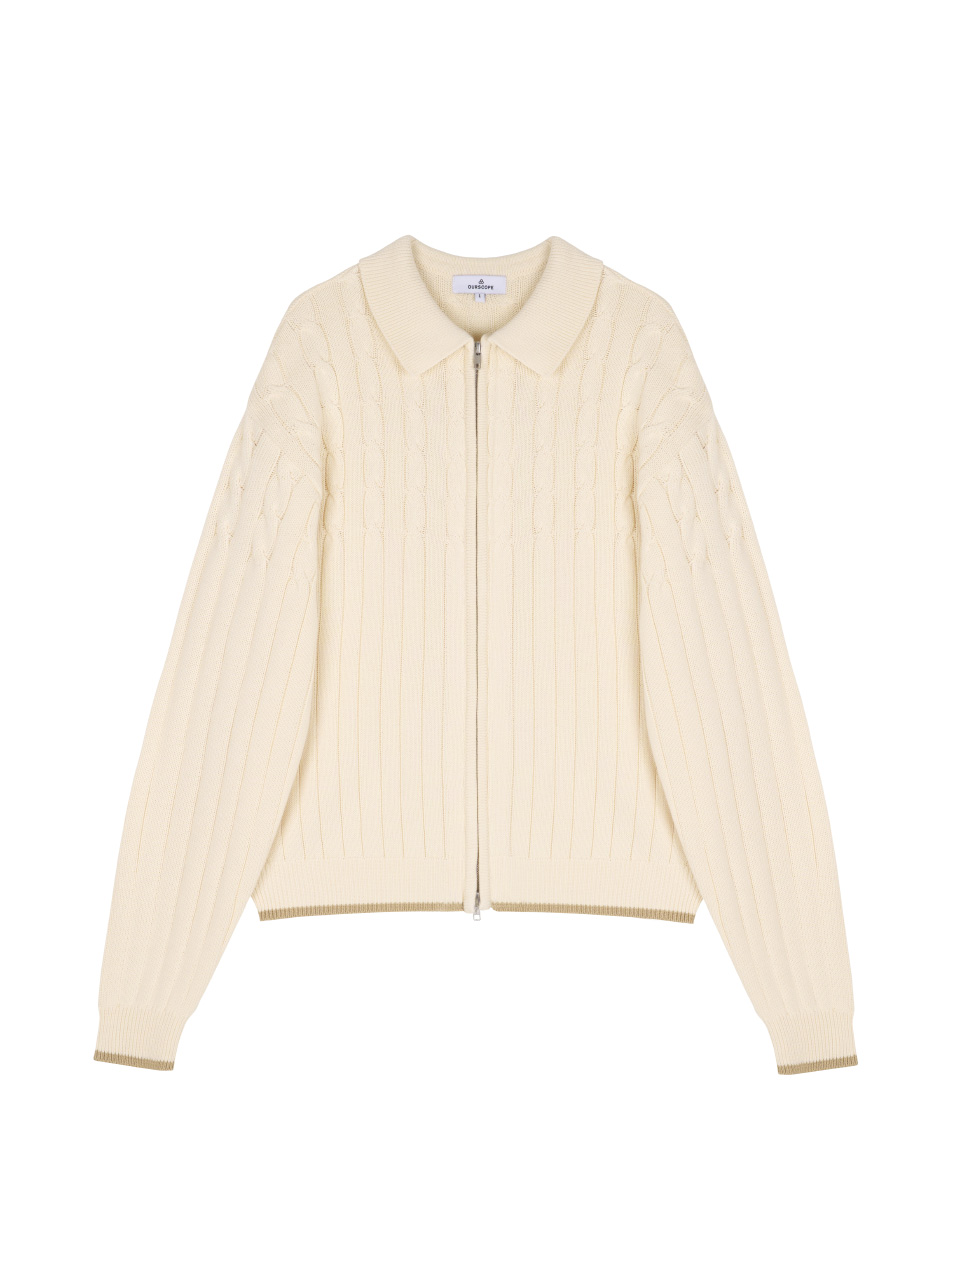 OURSCOPE - CANO CABLE ZIP UP KNIT (CREAM)